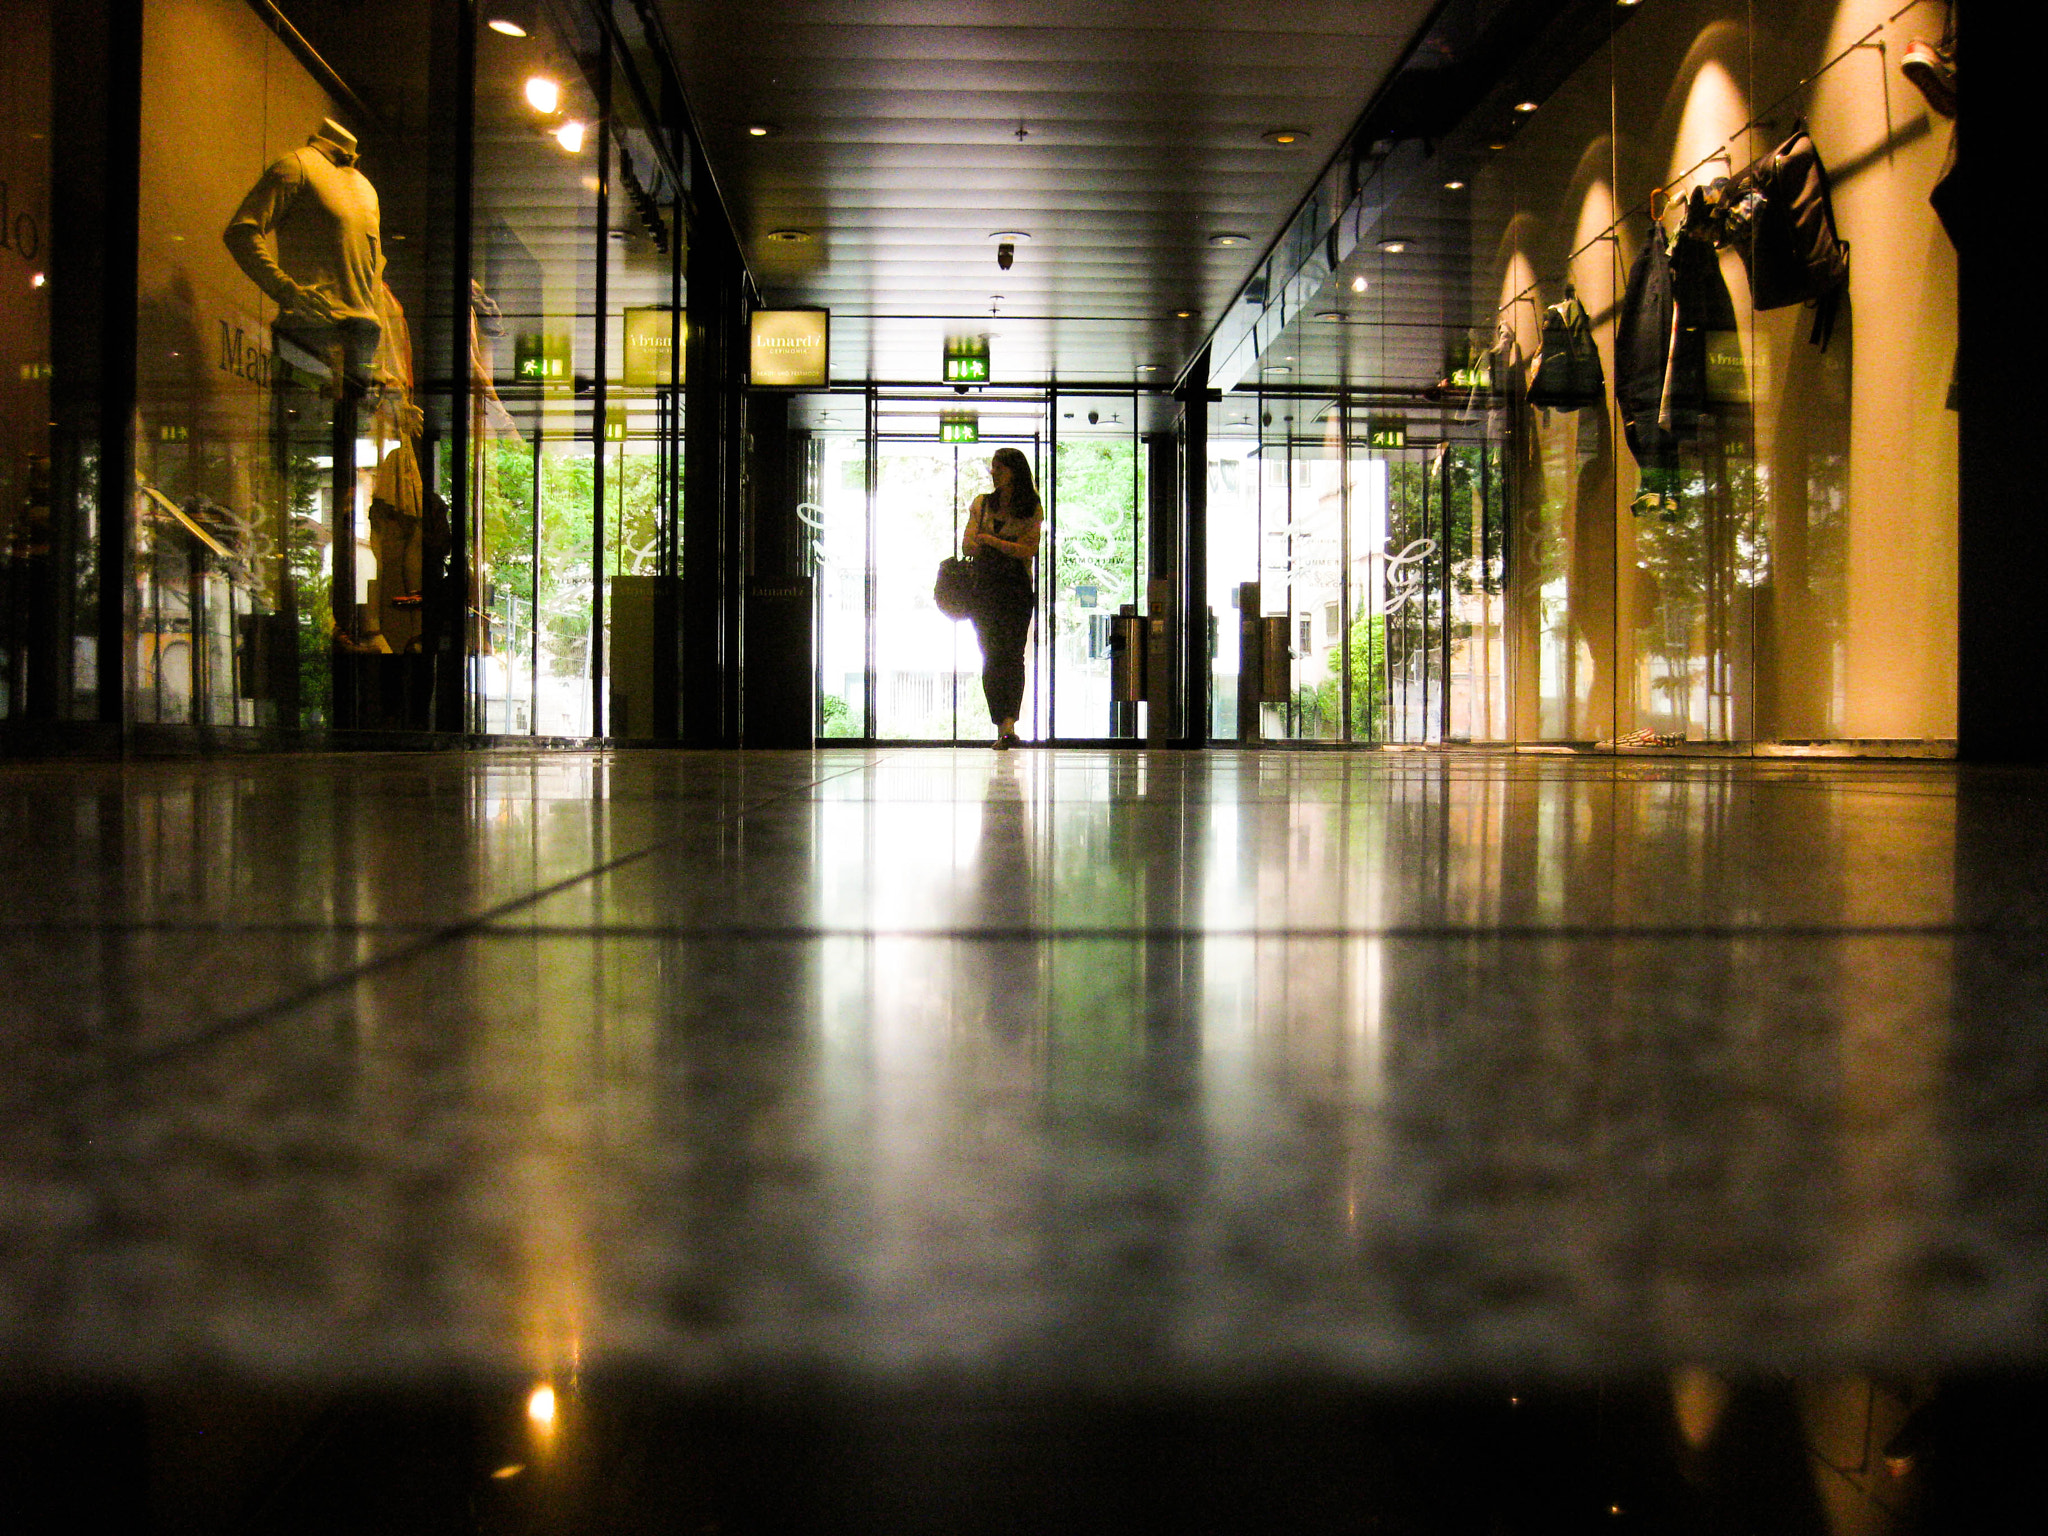 Canon PowerShot SD770 IS (Digital IXUS 85 IS / IXY Digital 25 IS) sample photo. Girl alone in the mall photography